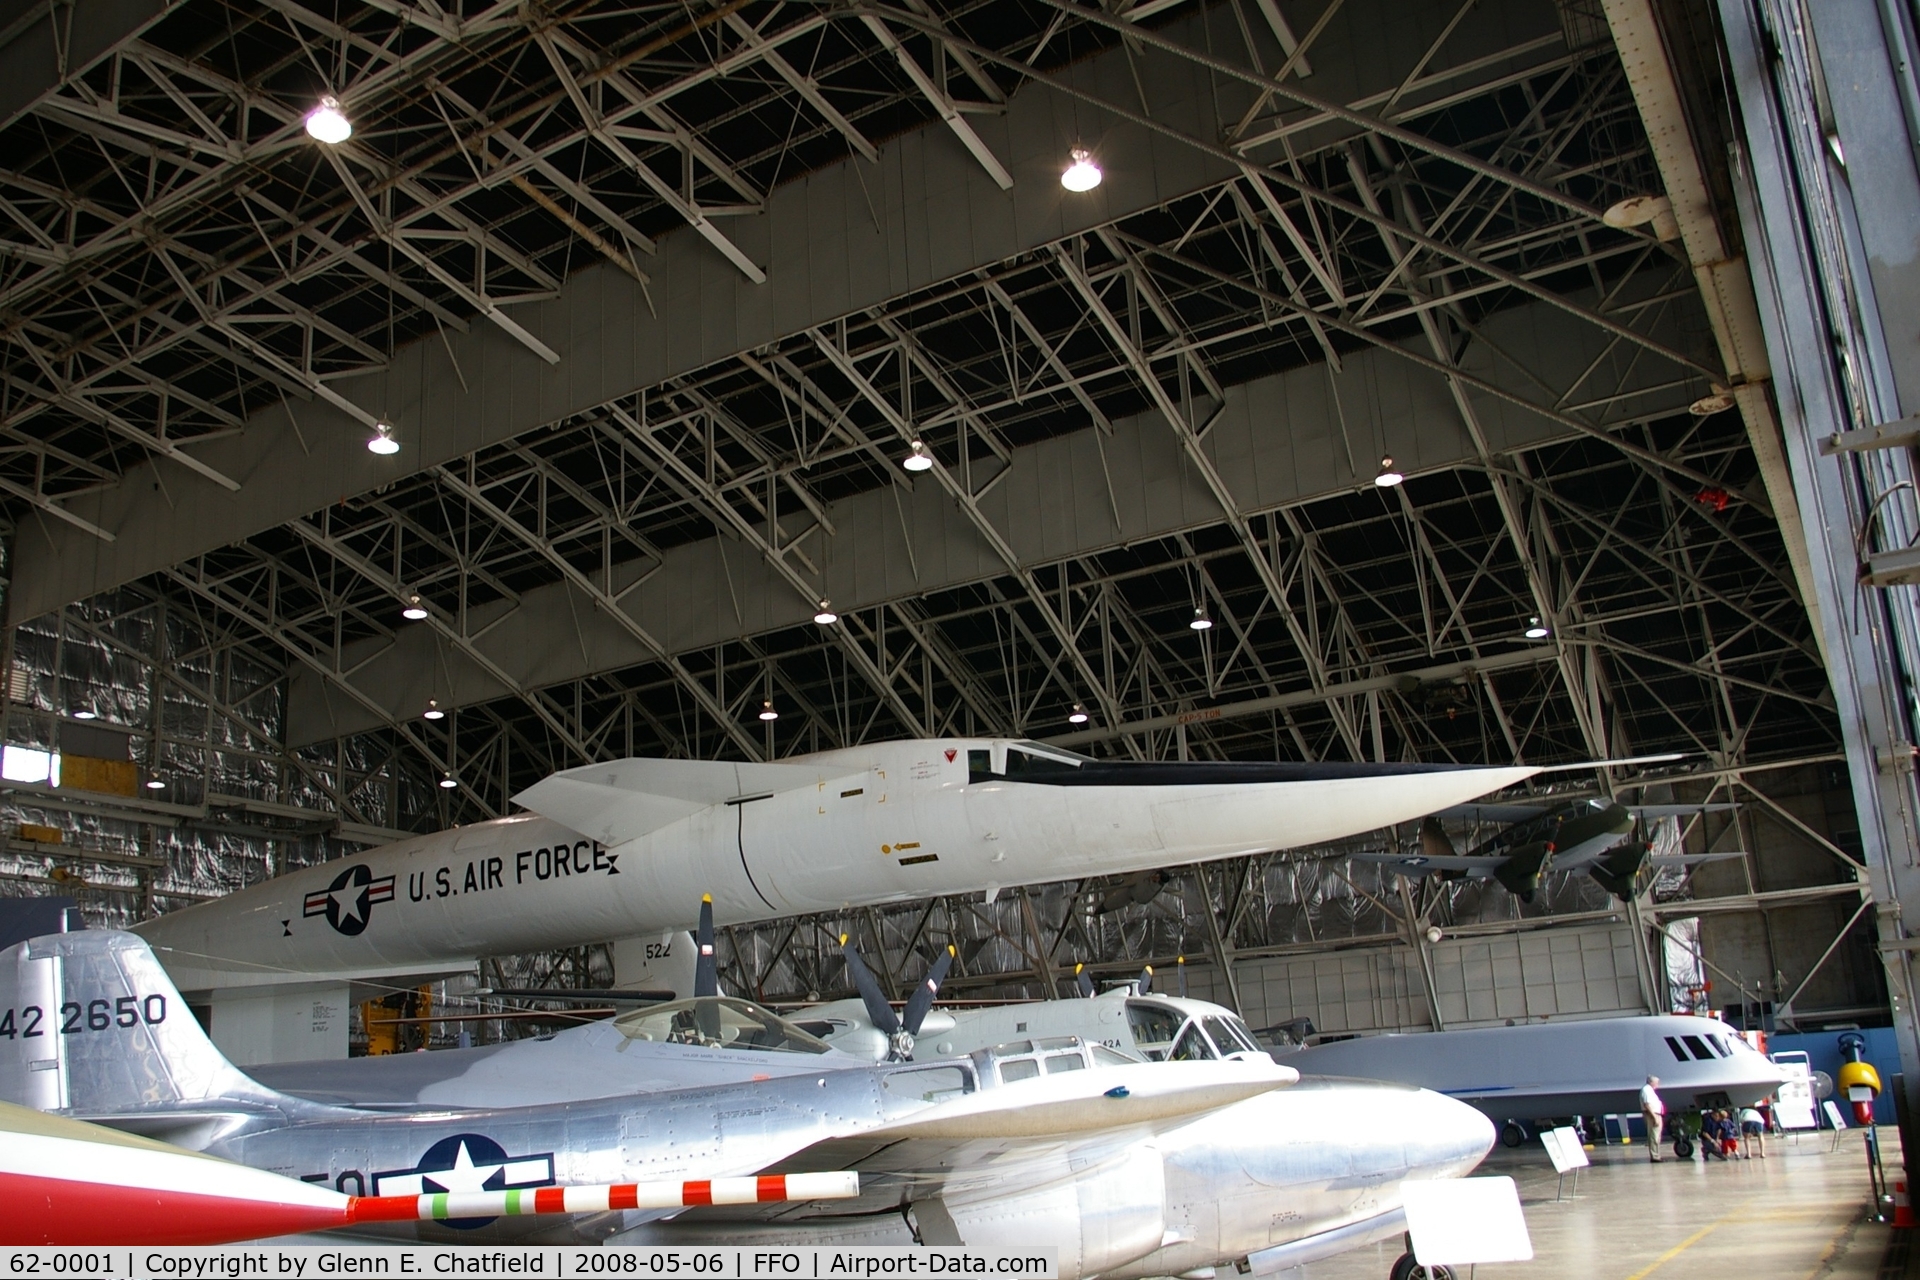 62-0001, 1964 North American XB-70A Valkyrie C/N 278-1, The Valkyrie stuffed into a hangar at the National Museum of the U.S. Air Force